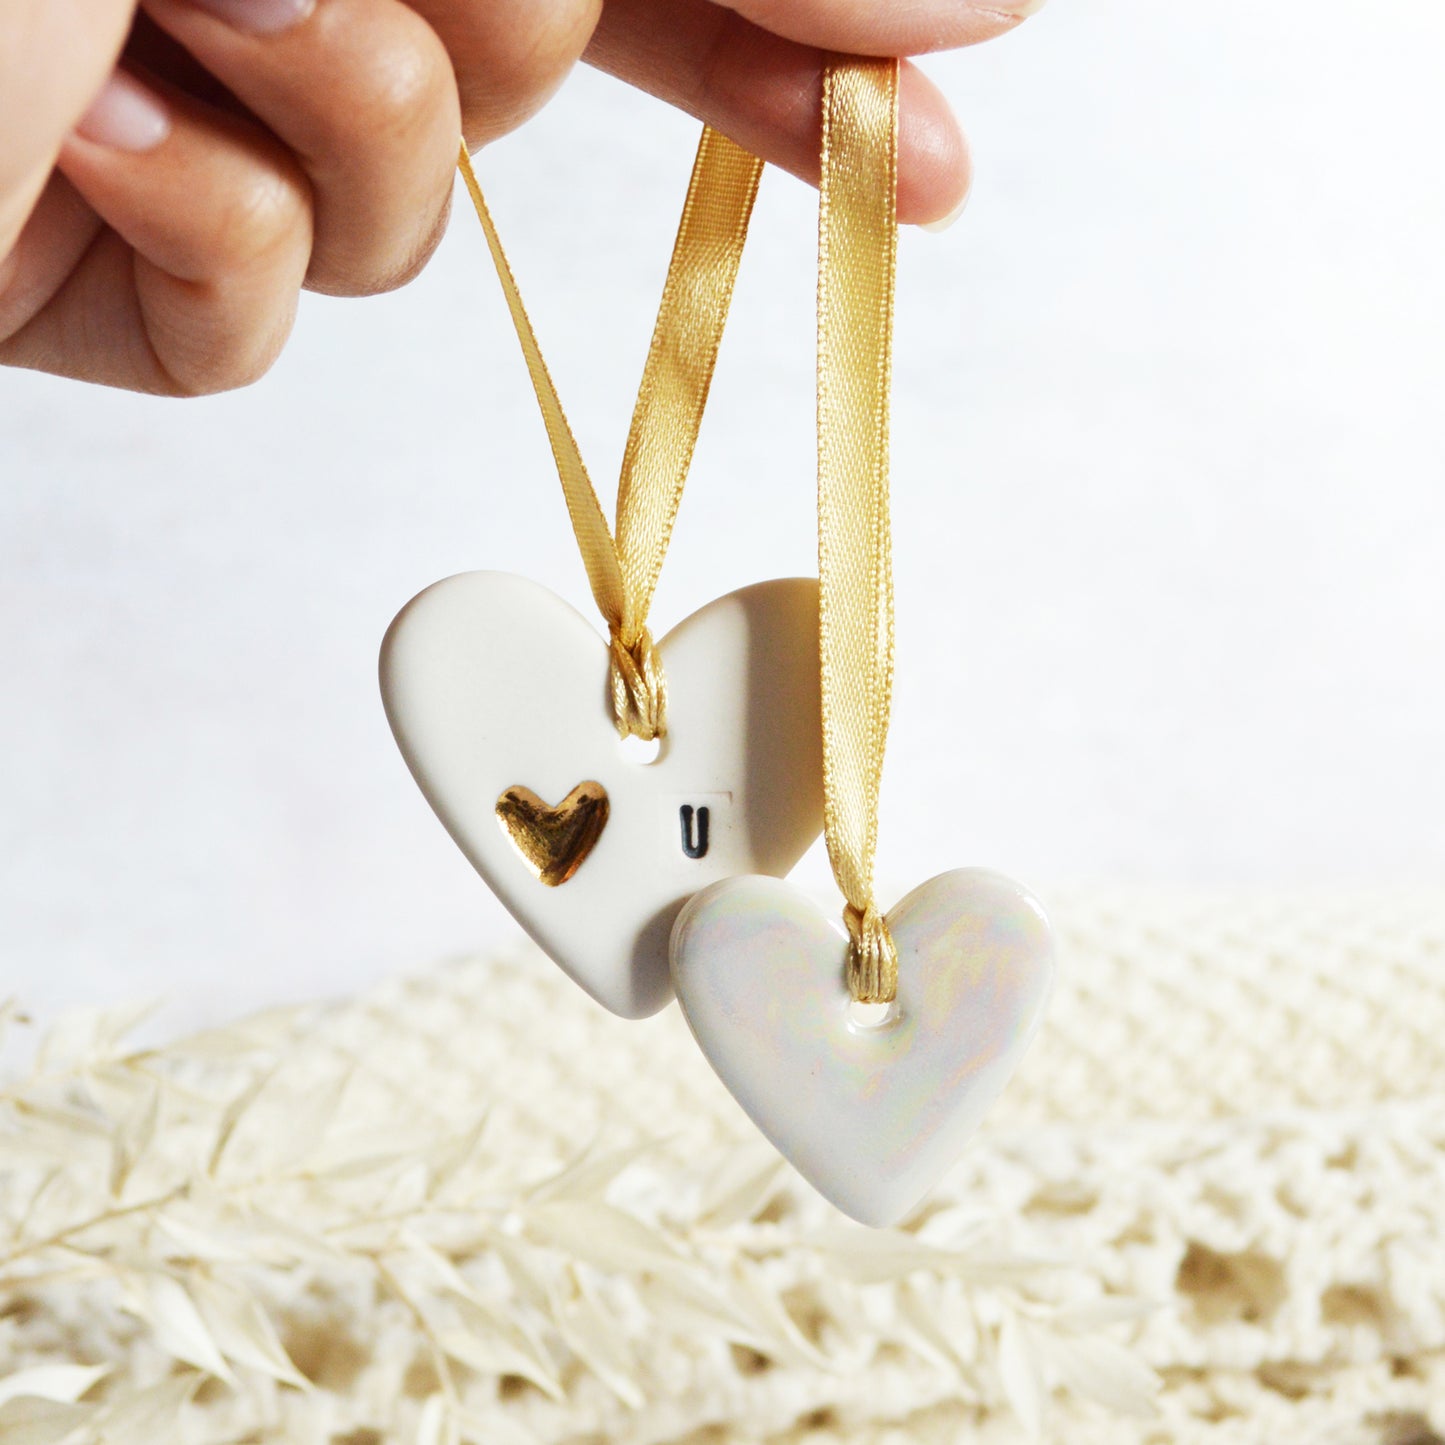 Mini Hanging Heart Tags (Pair) | Love You Heart Tag With A Mini Pearl Heart Tag | Valentine's Gift | Porcelain